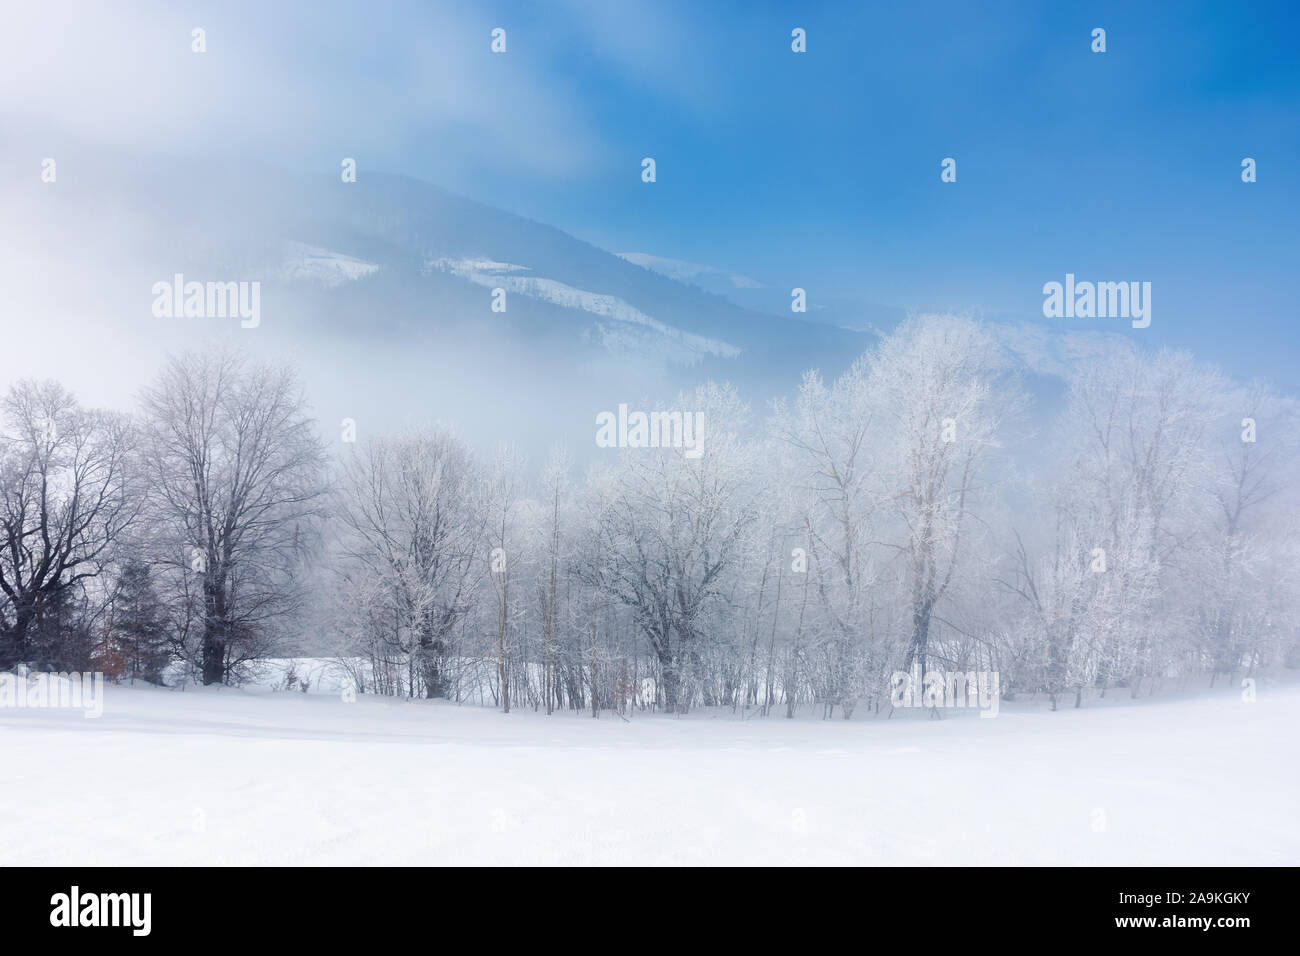 row of tees in hoarfrost on a snowy meadow.  fantastic winter scenery in misty weather at sunrise. fairy tale mountain landscape concept Stock Photo